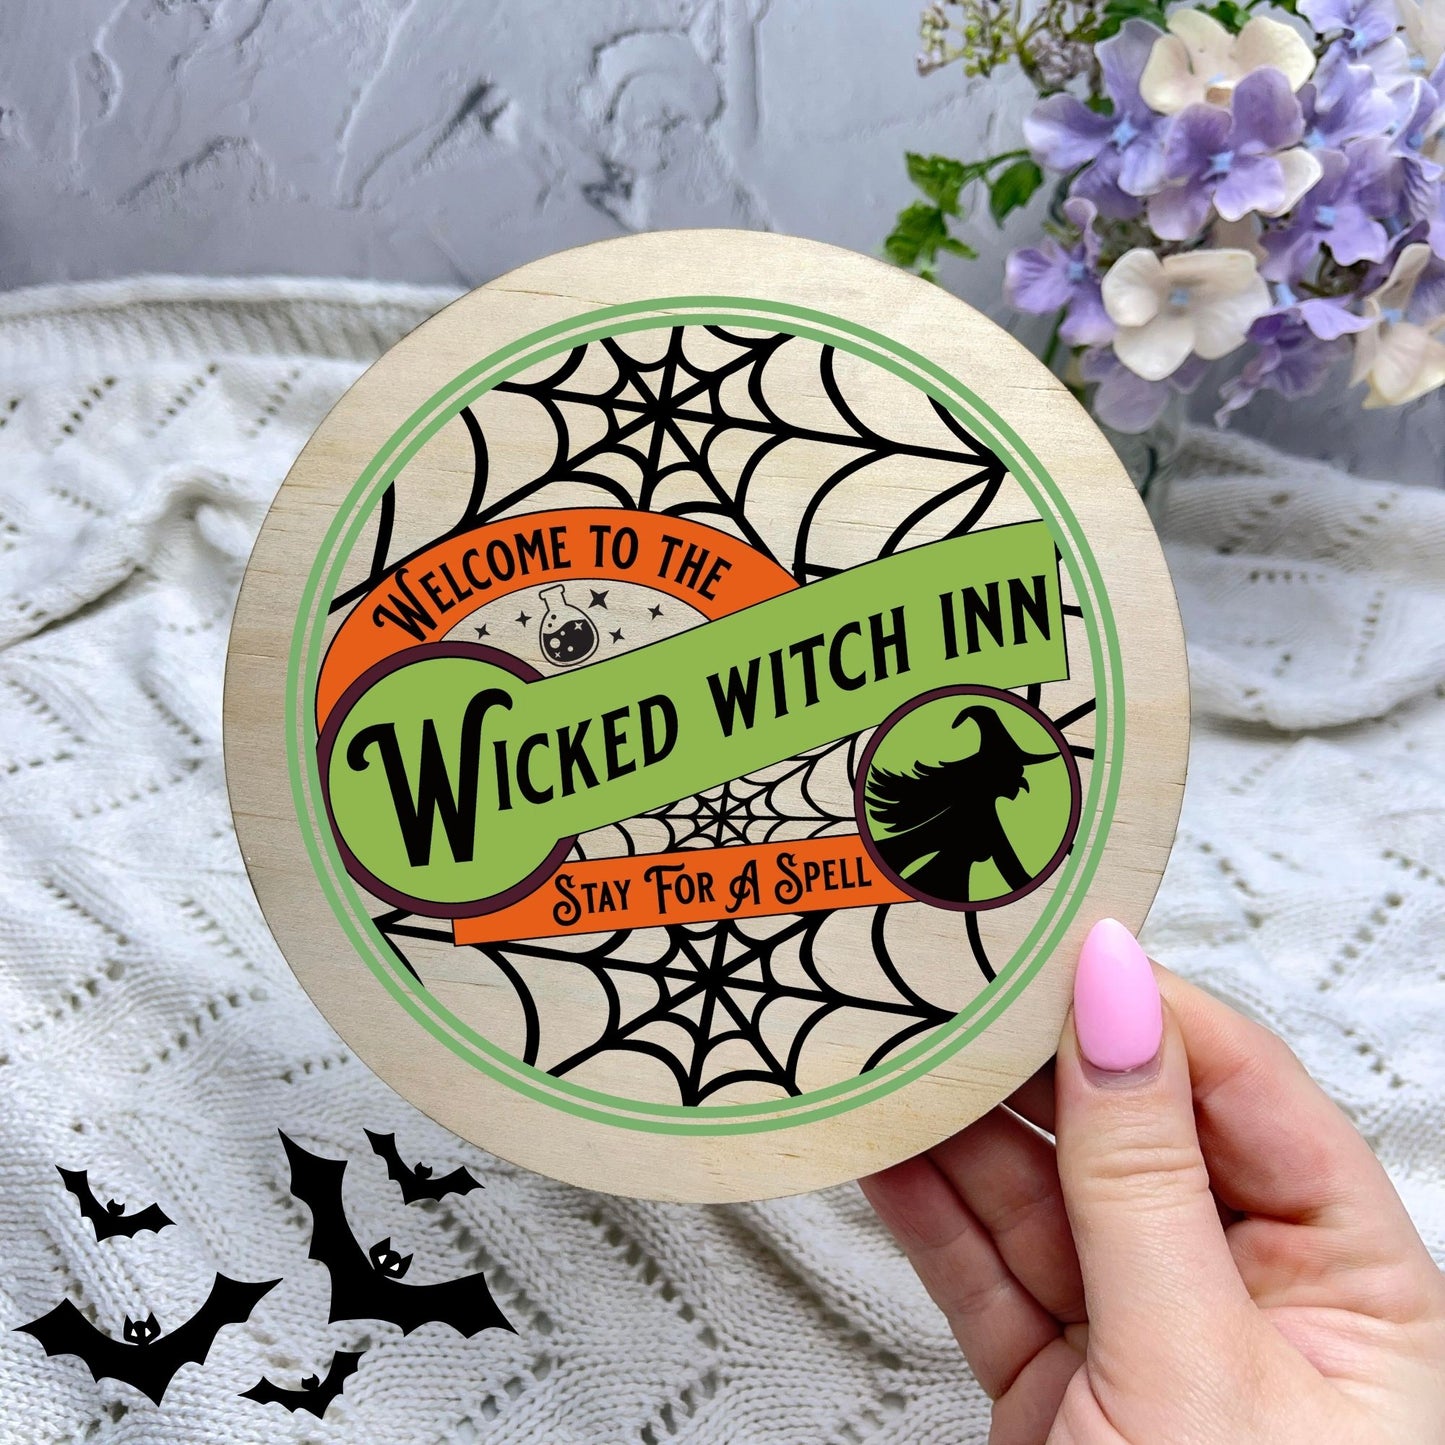 Wicked witch inn sign, Halloween Decor, Spooky Vibes, hocus pocus sign, trick or treat decor, haunted house h56